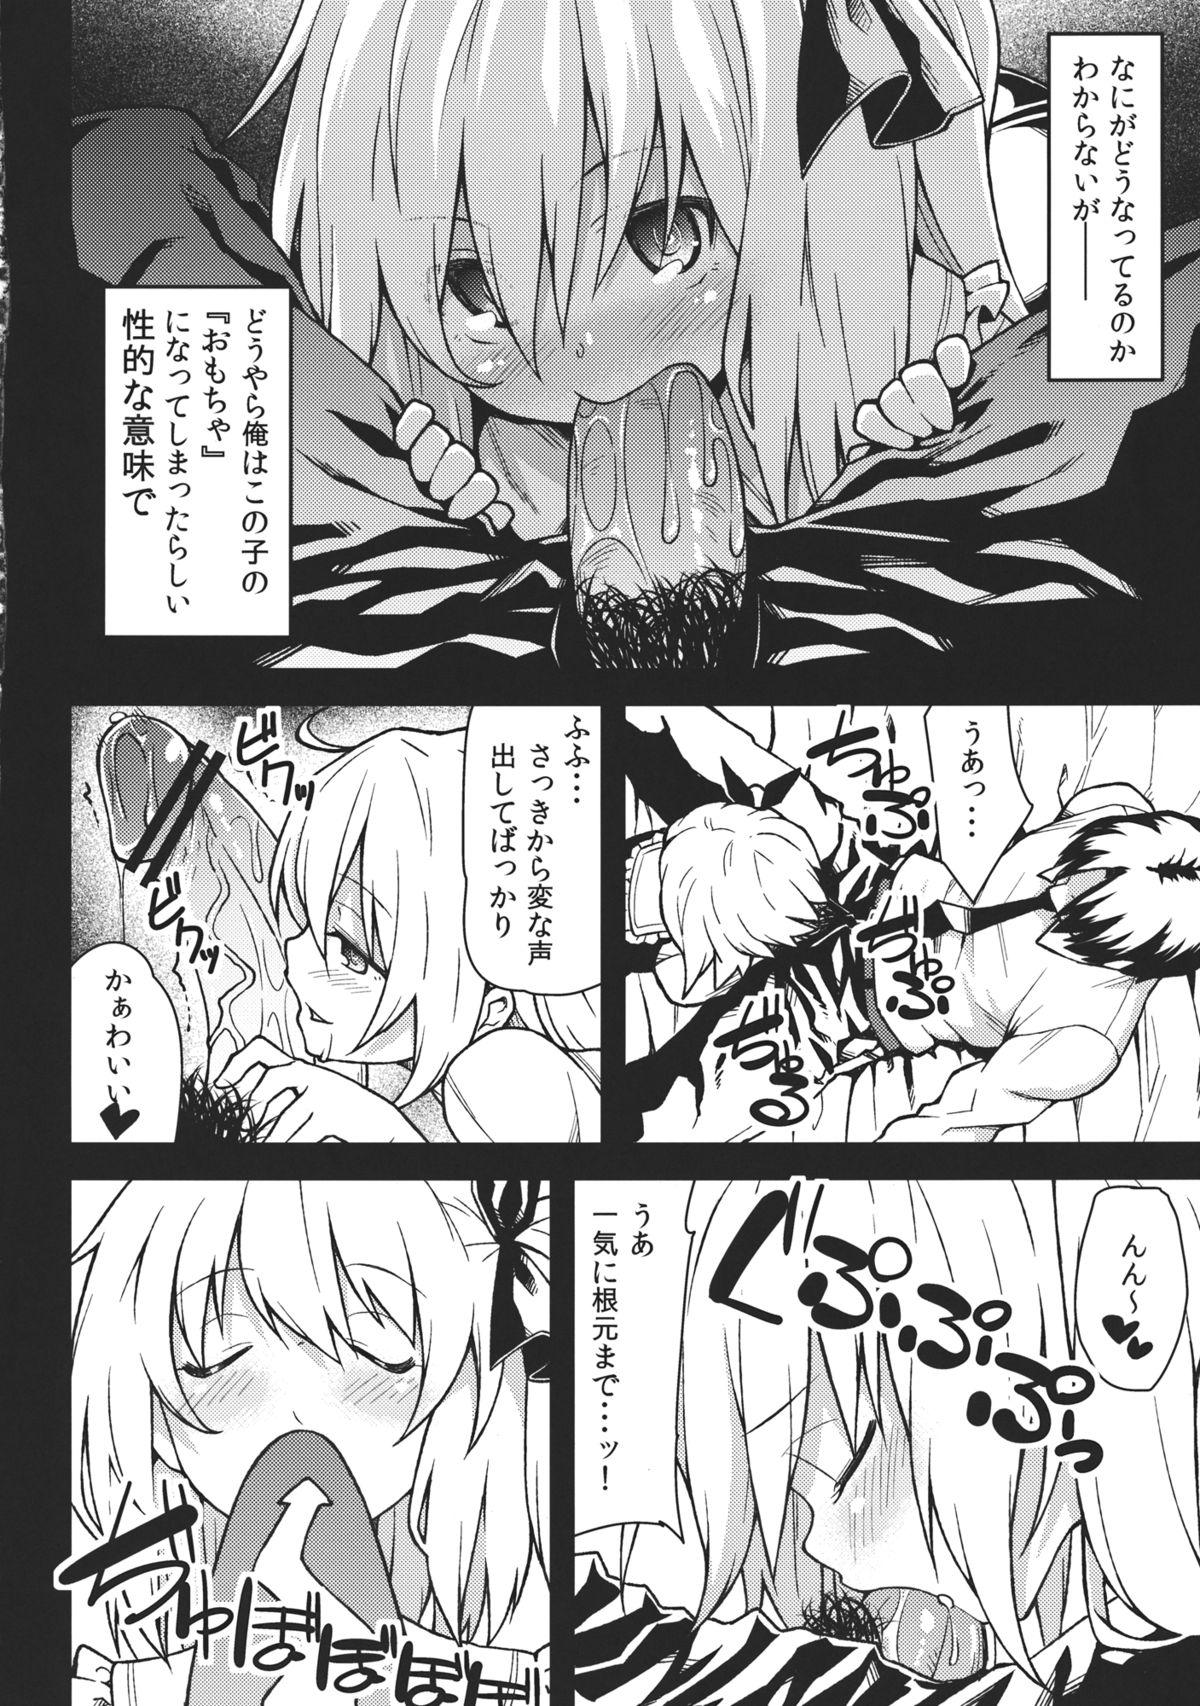 Arabe Flan no Omocha - Touhou project Storyline - Page 4